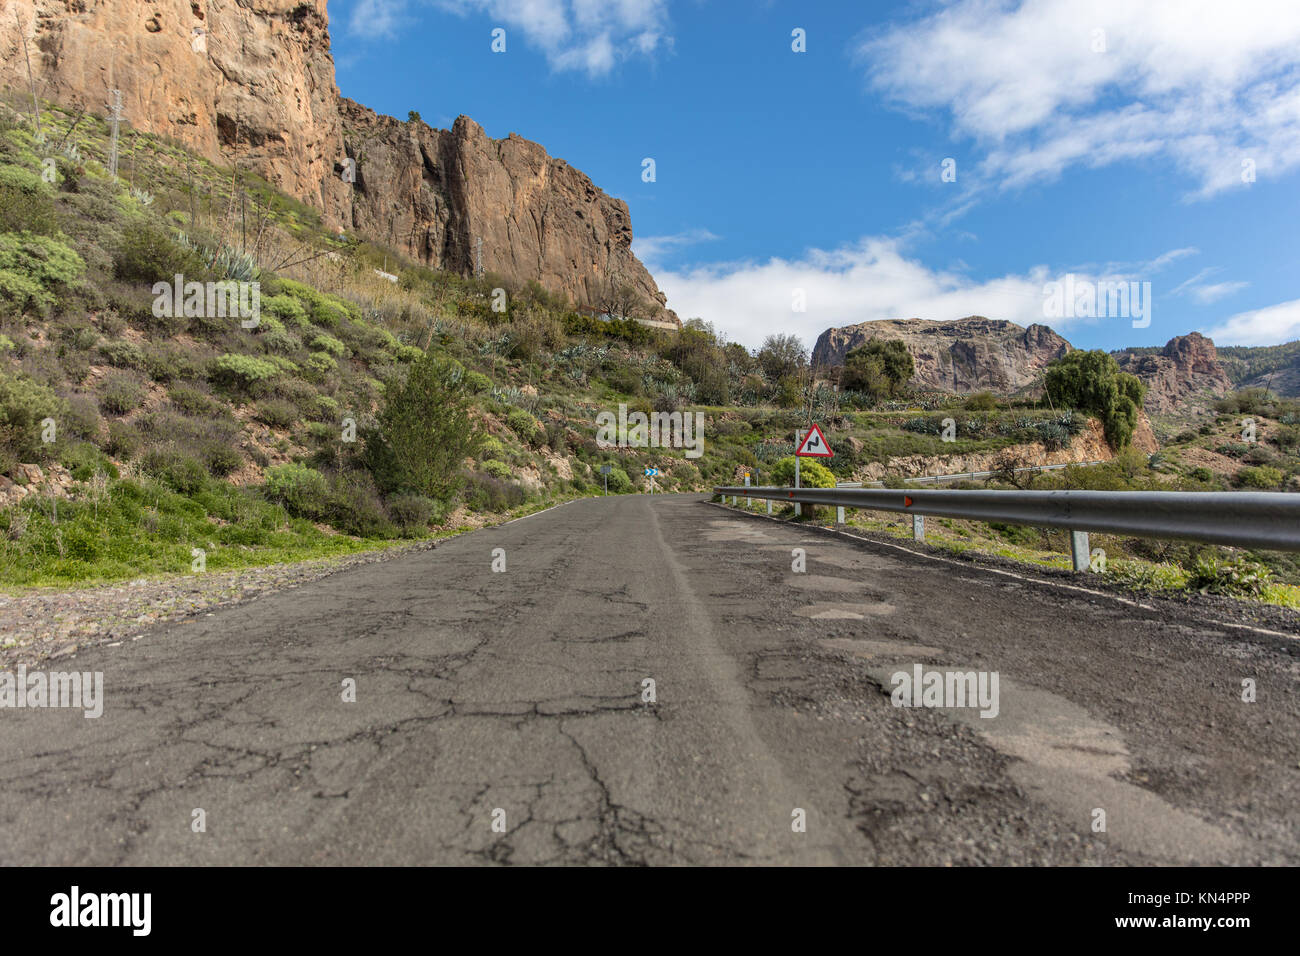 Street with guardrail and double curve road sign in mountain roadway in Gran Canaria Stock Photo